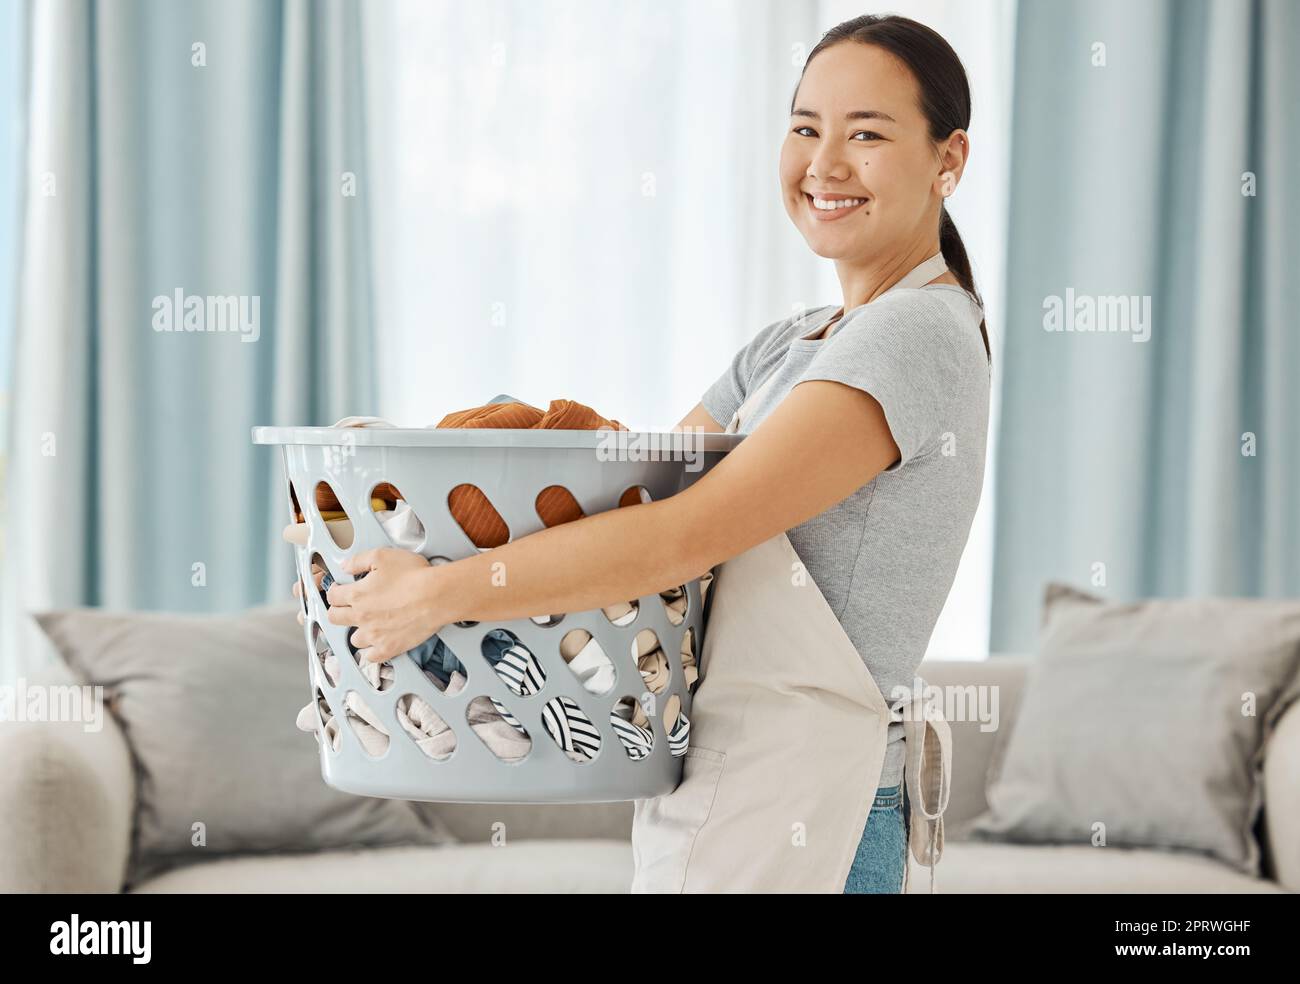 https://c8.alamy.com/comp/2PRWGHF/happy-asian-cleaner-woman-with-laundry-working-for-home-house-or-hotel-hospitality-cleaning-help-service-agency-japanese-girl-maid-or-worker-smile-in-apartment-with-dirty-clothes-in-washing-basket-2PRWGHF.jpg